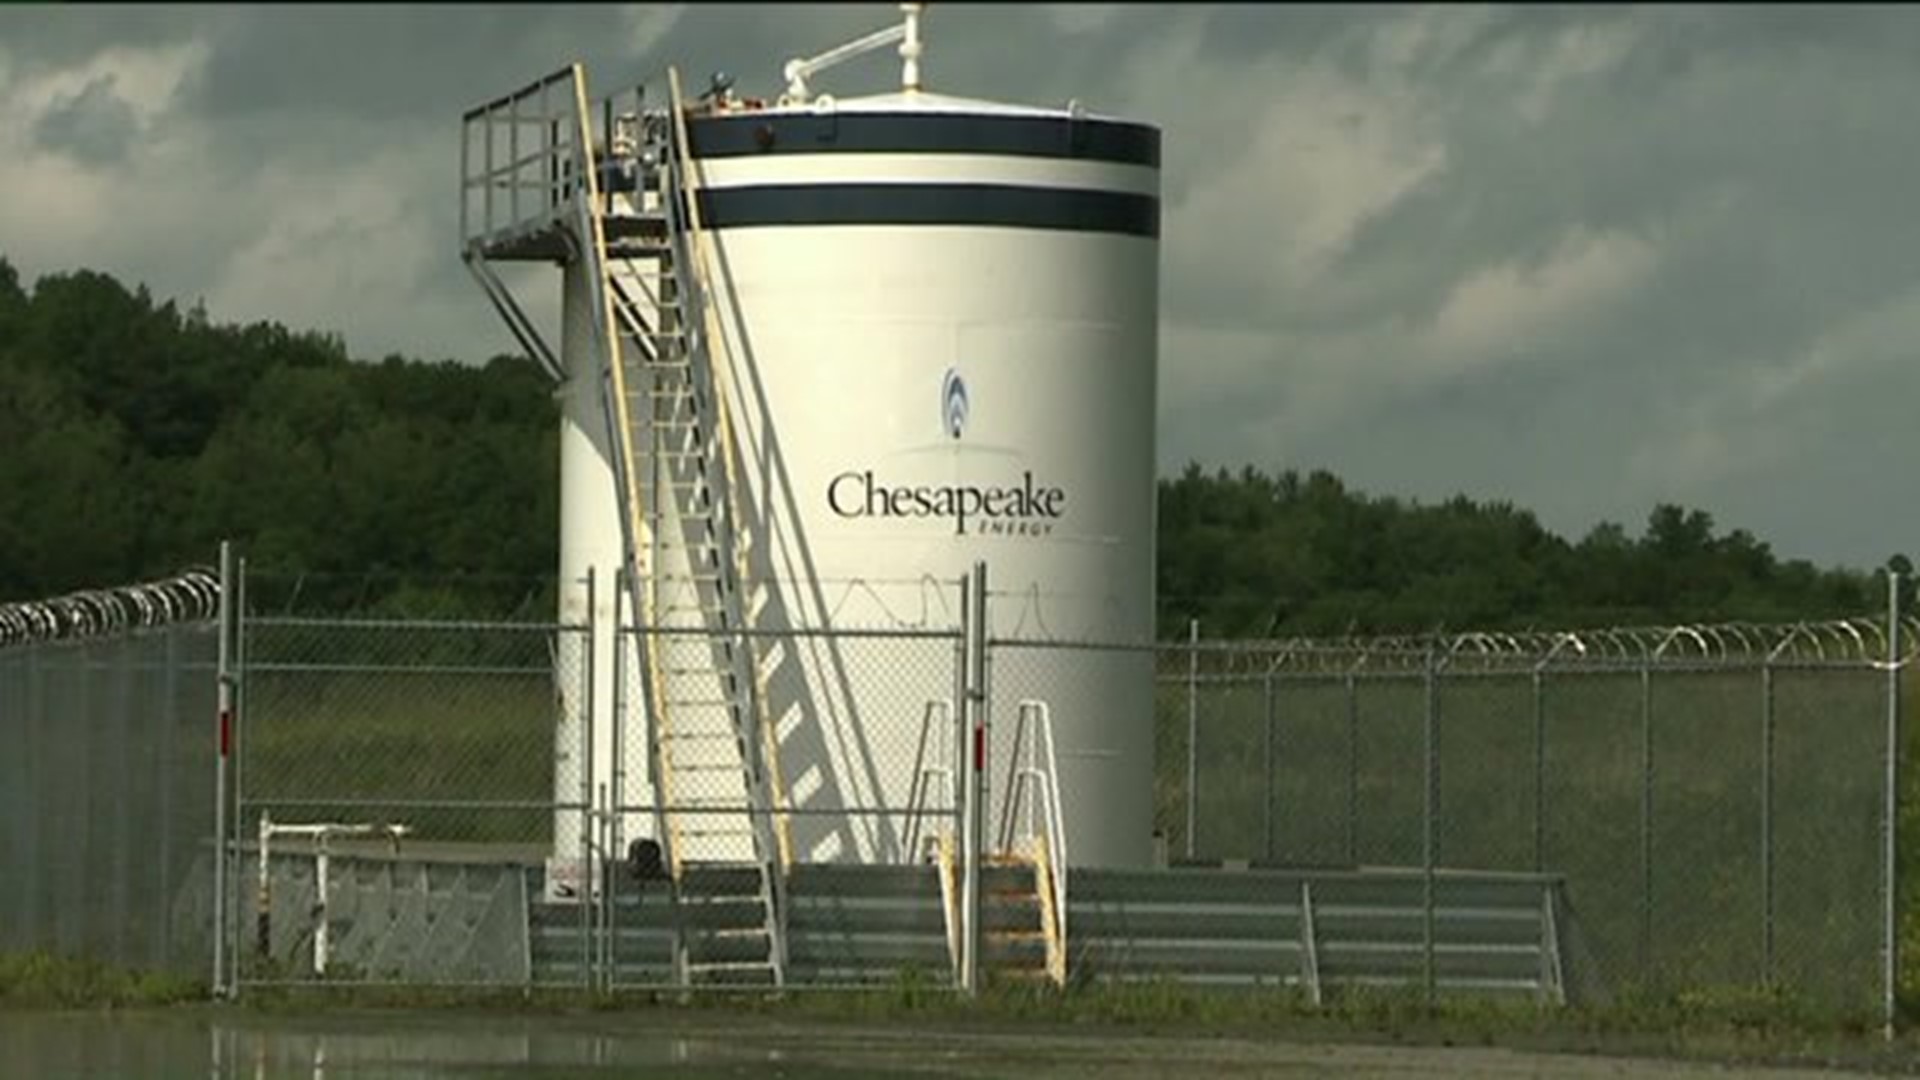 AG's Office: Chesapeake Used 'Bait and Switch' on Leaseholders